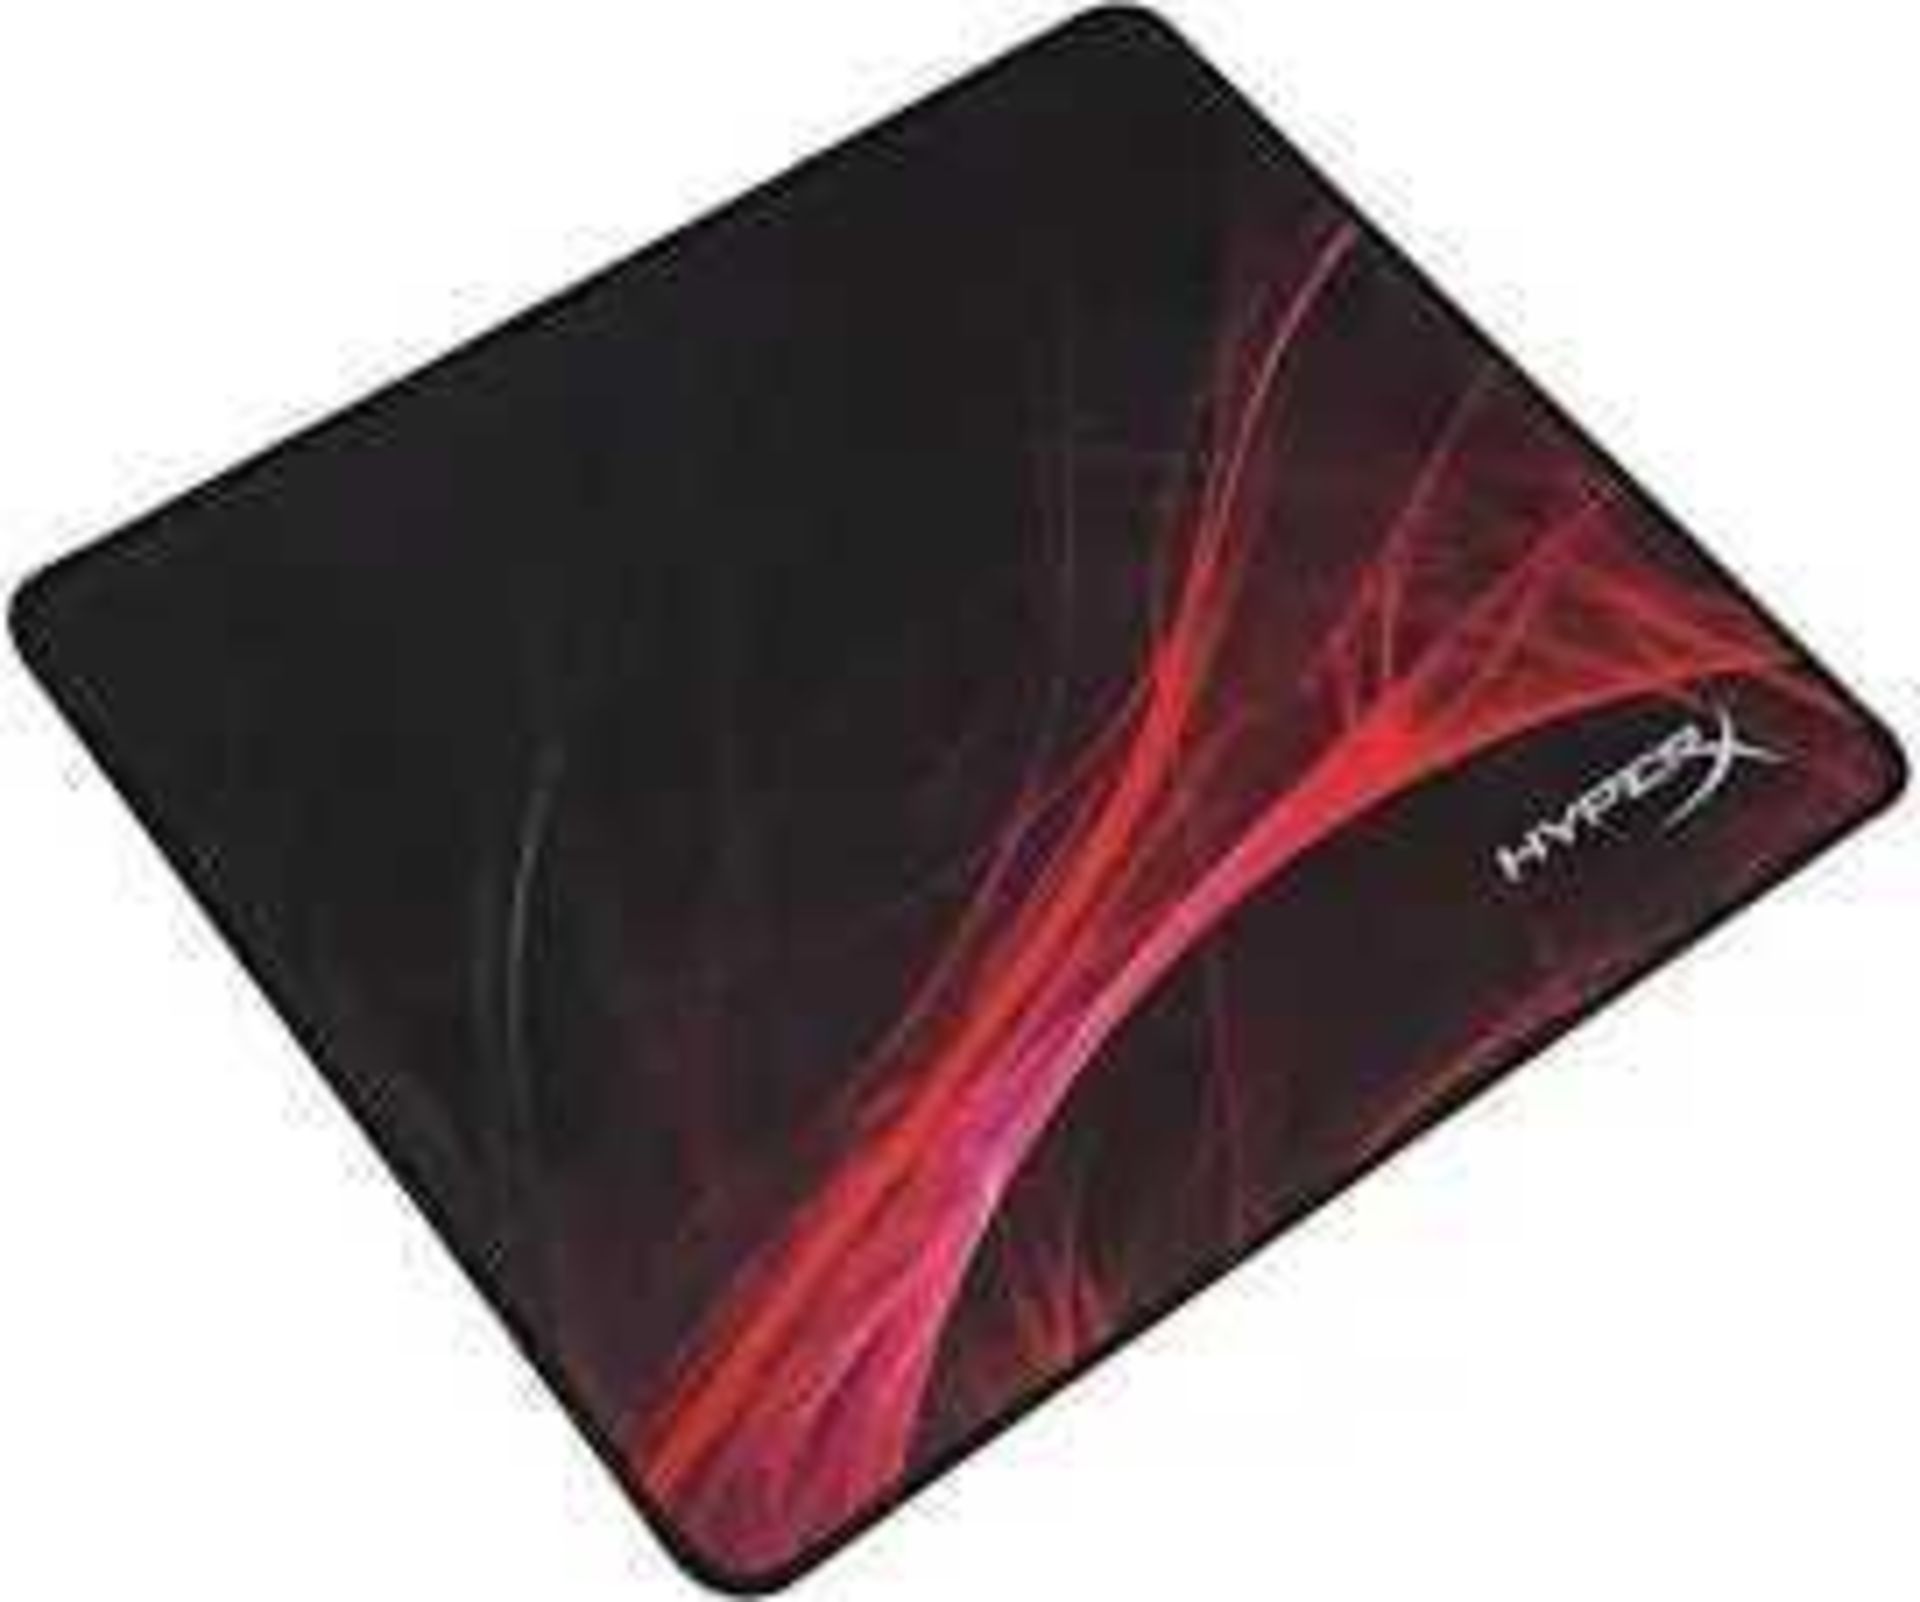 RRP £130 Lot Contains X3 Boxed Items Including Hyperx Fury 5 Mouse Pad